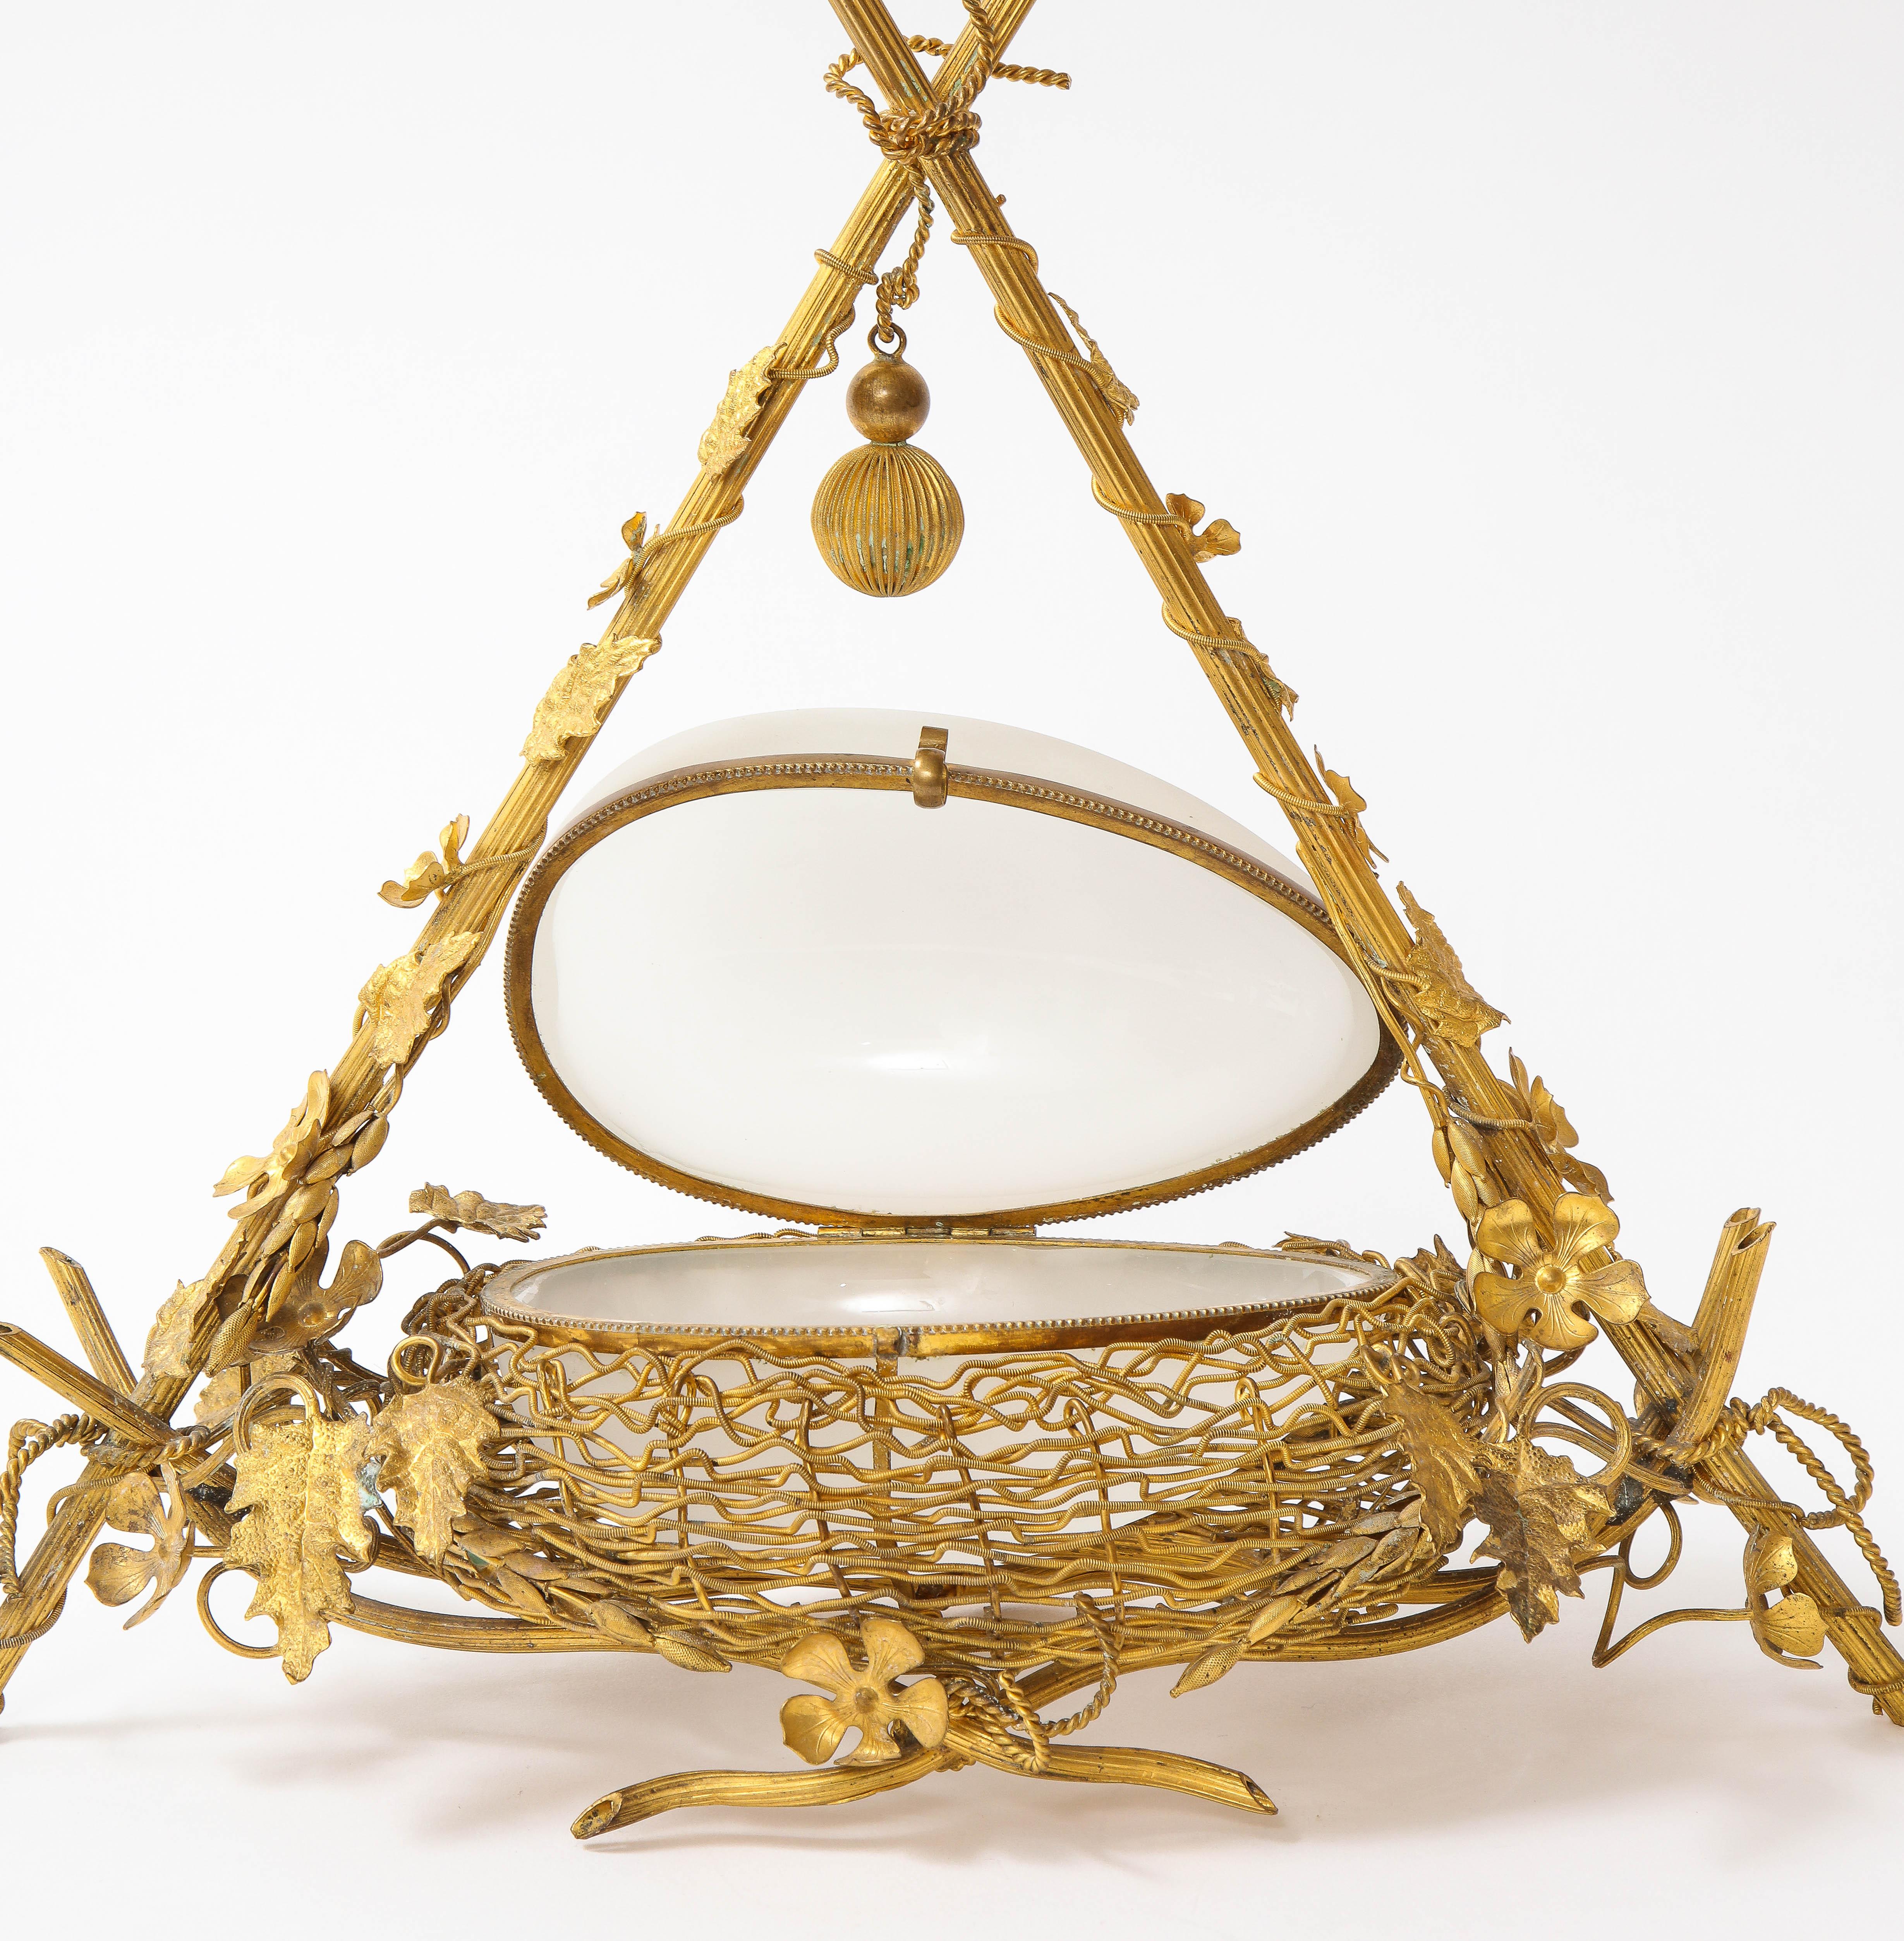 19th Century A 19th C. French Dore Bronze Mounted White Opaline Egg Form Covered Nesting Box For Sale